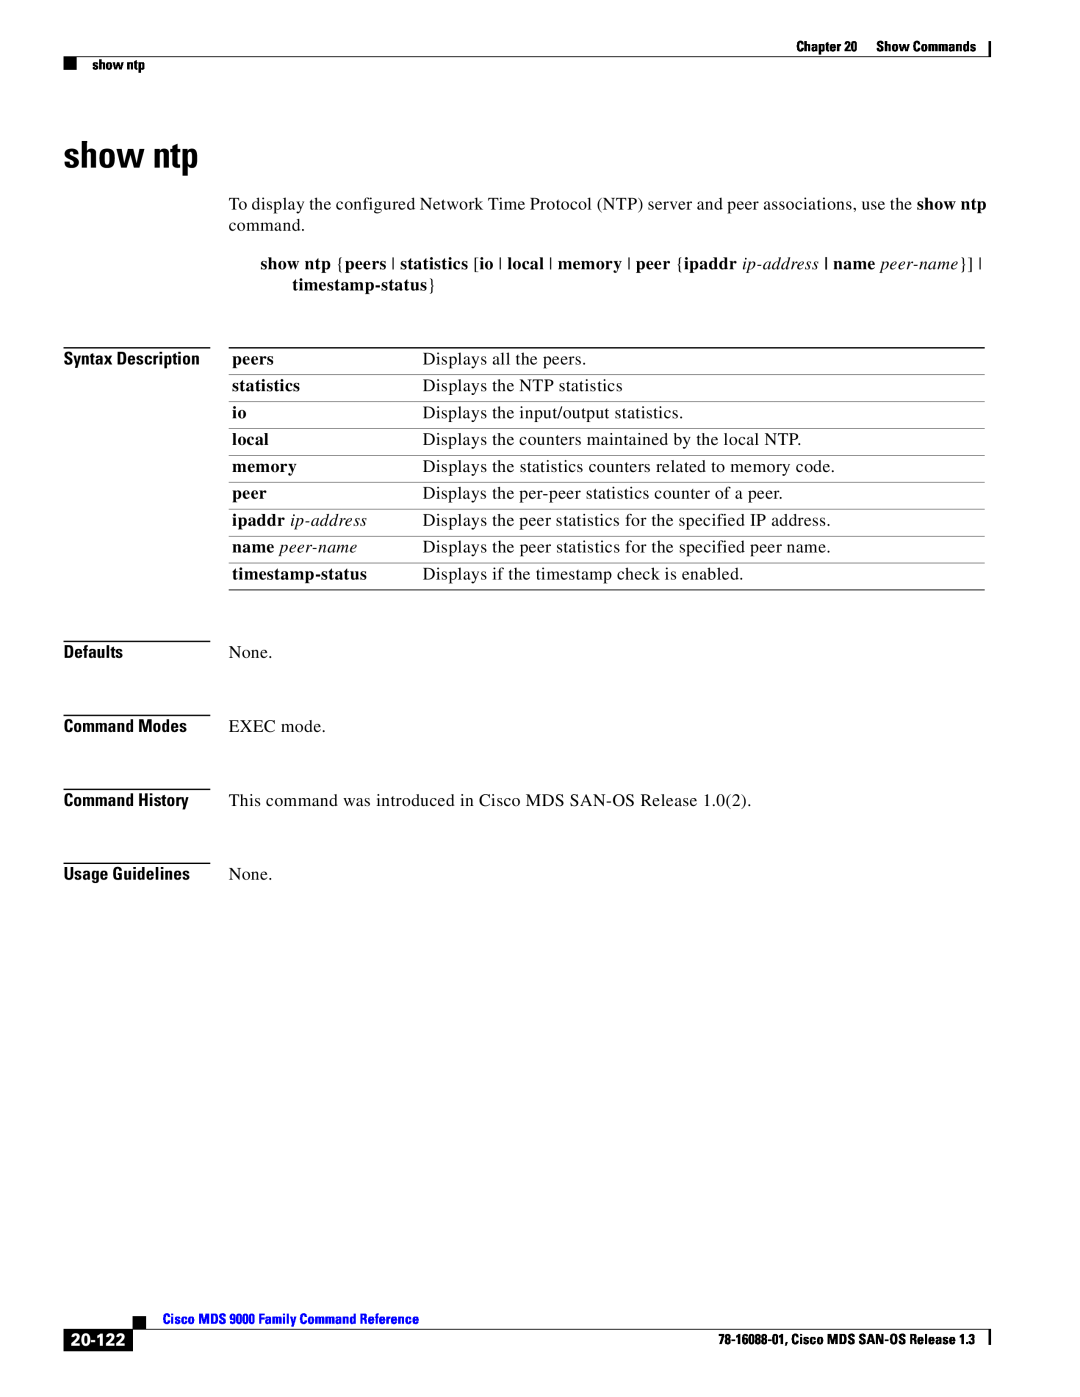 Cisco Systems MDS 9000 manual show ntp, timestamp-status, peers, local, memory, ipaddr ip-address, name peer-name, 20-122 